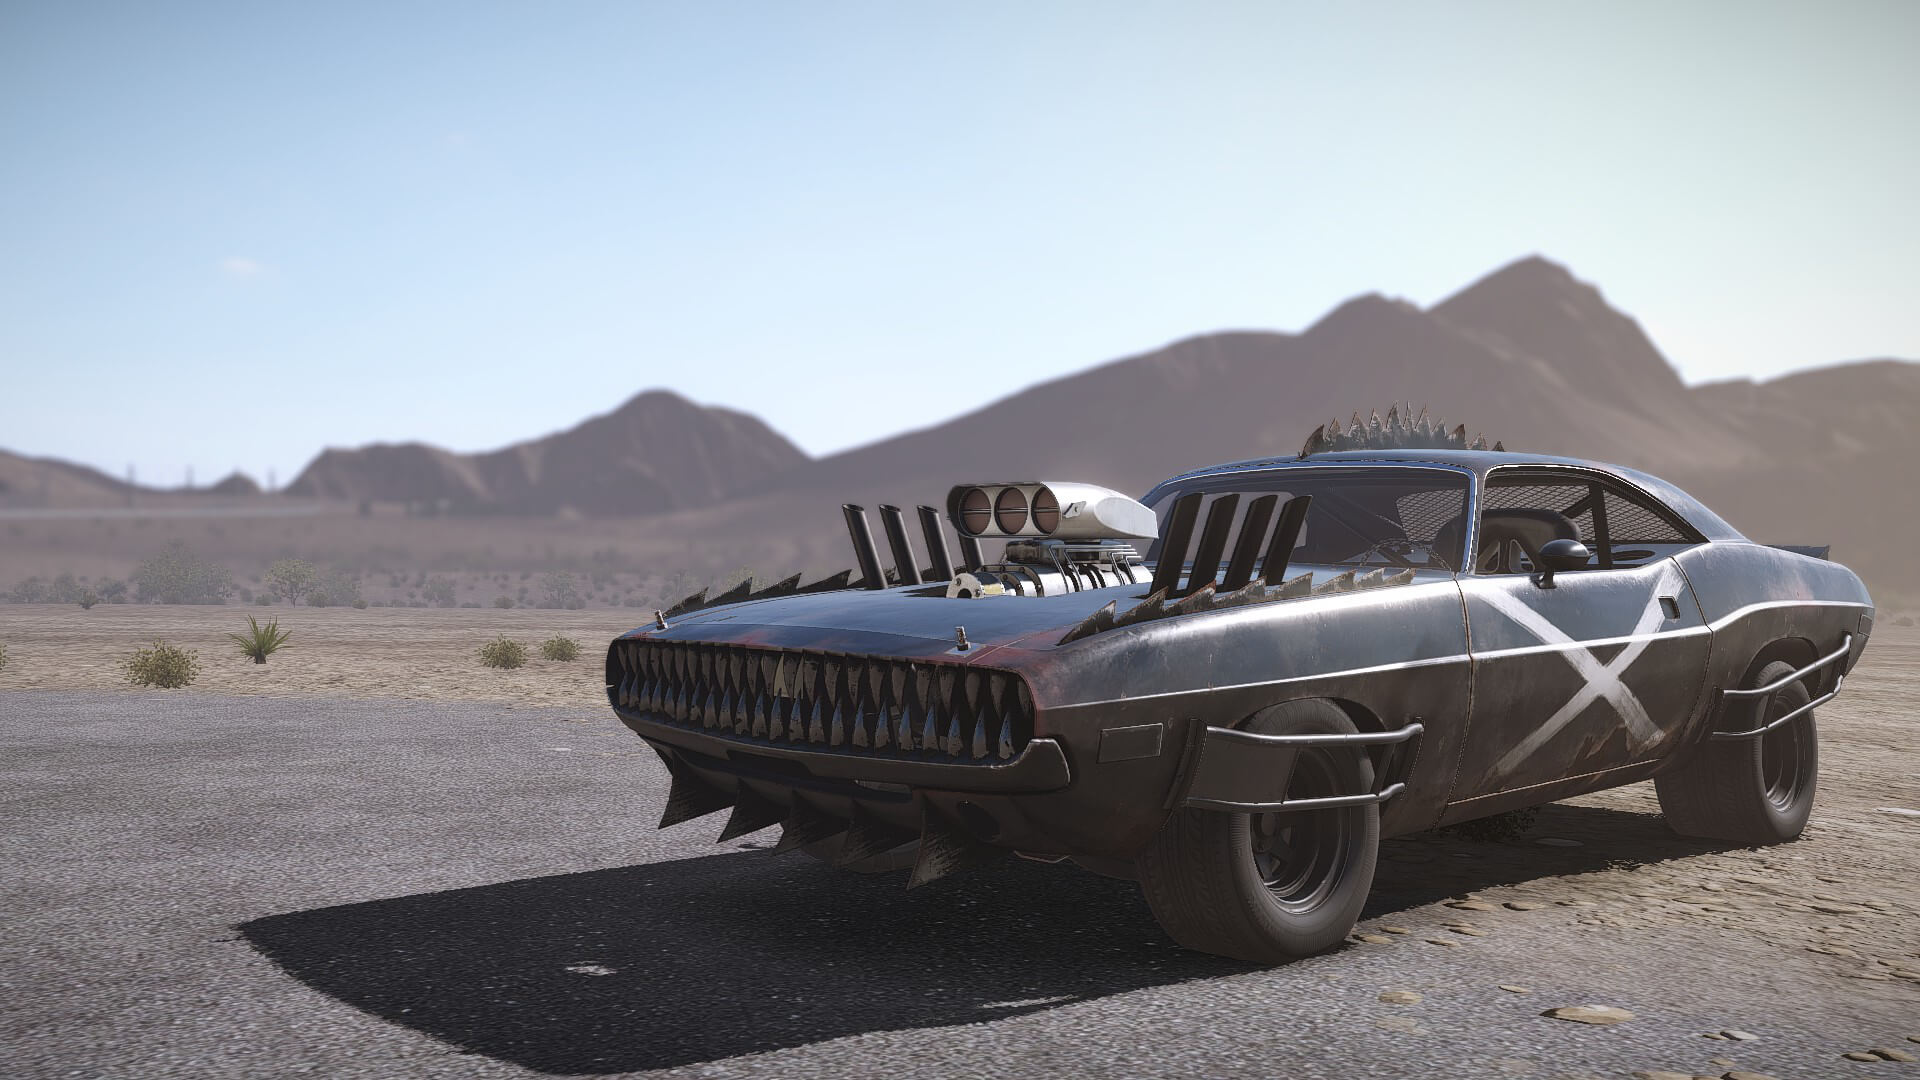 Image for Wreckfest coming to consoles in August alongside free update for PC players